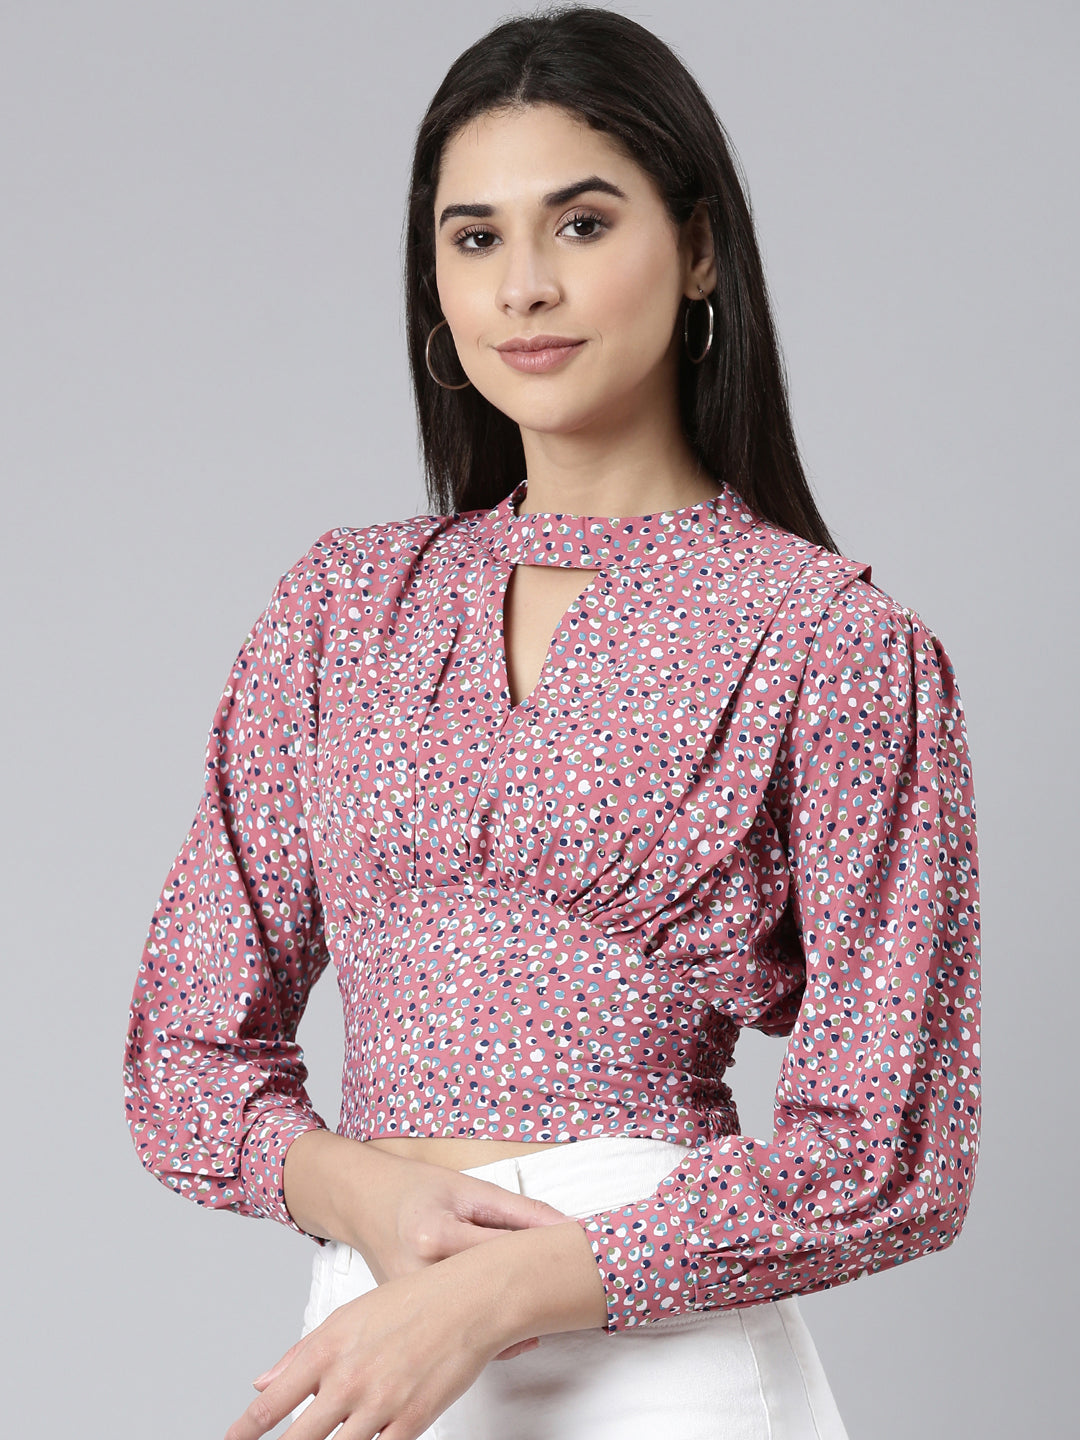 Keyhole Neck Cuffed Sleeves Abstract Cinched Waist Mauve Crop Top